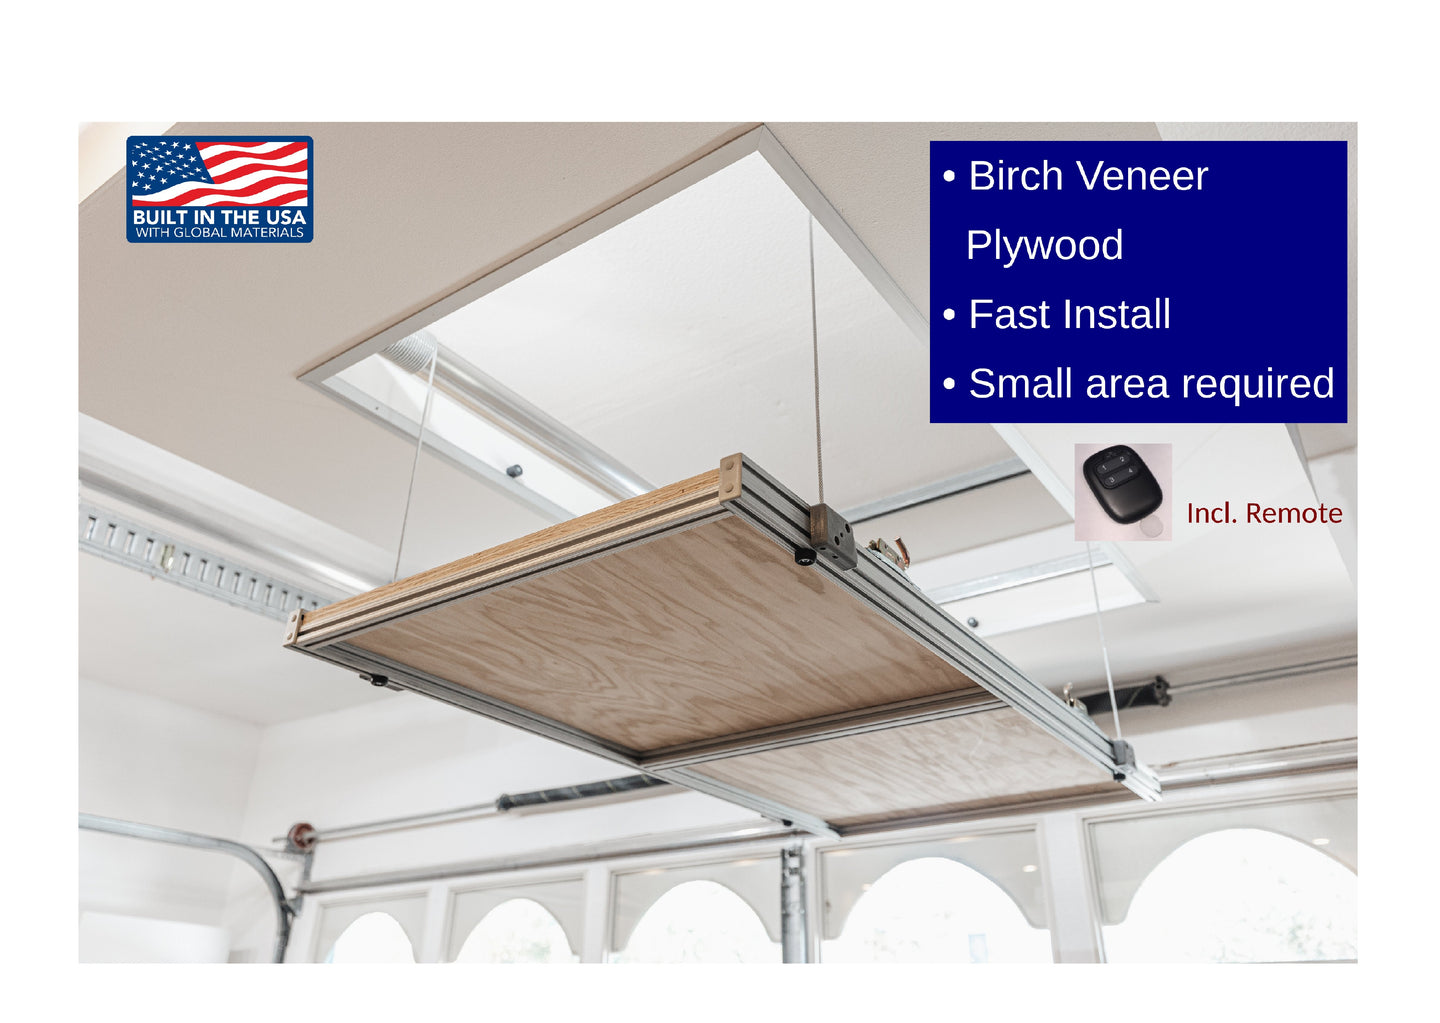 The Premium Attic-Lift (incl. seal for a flush ceiling)